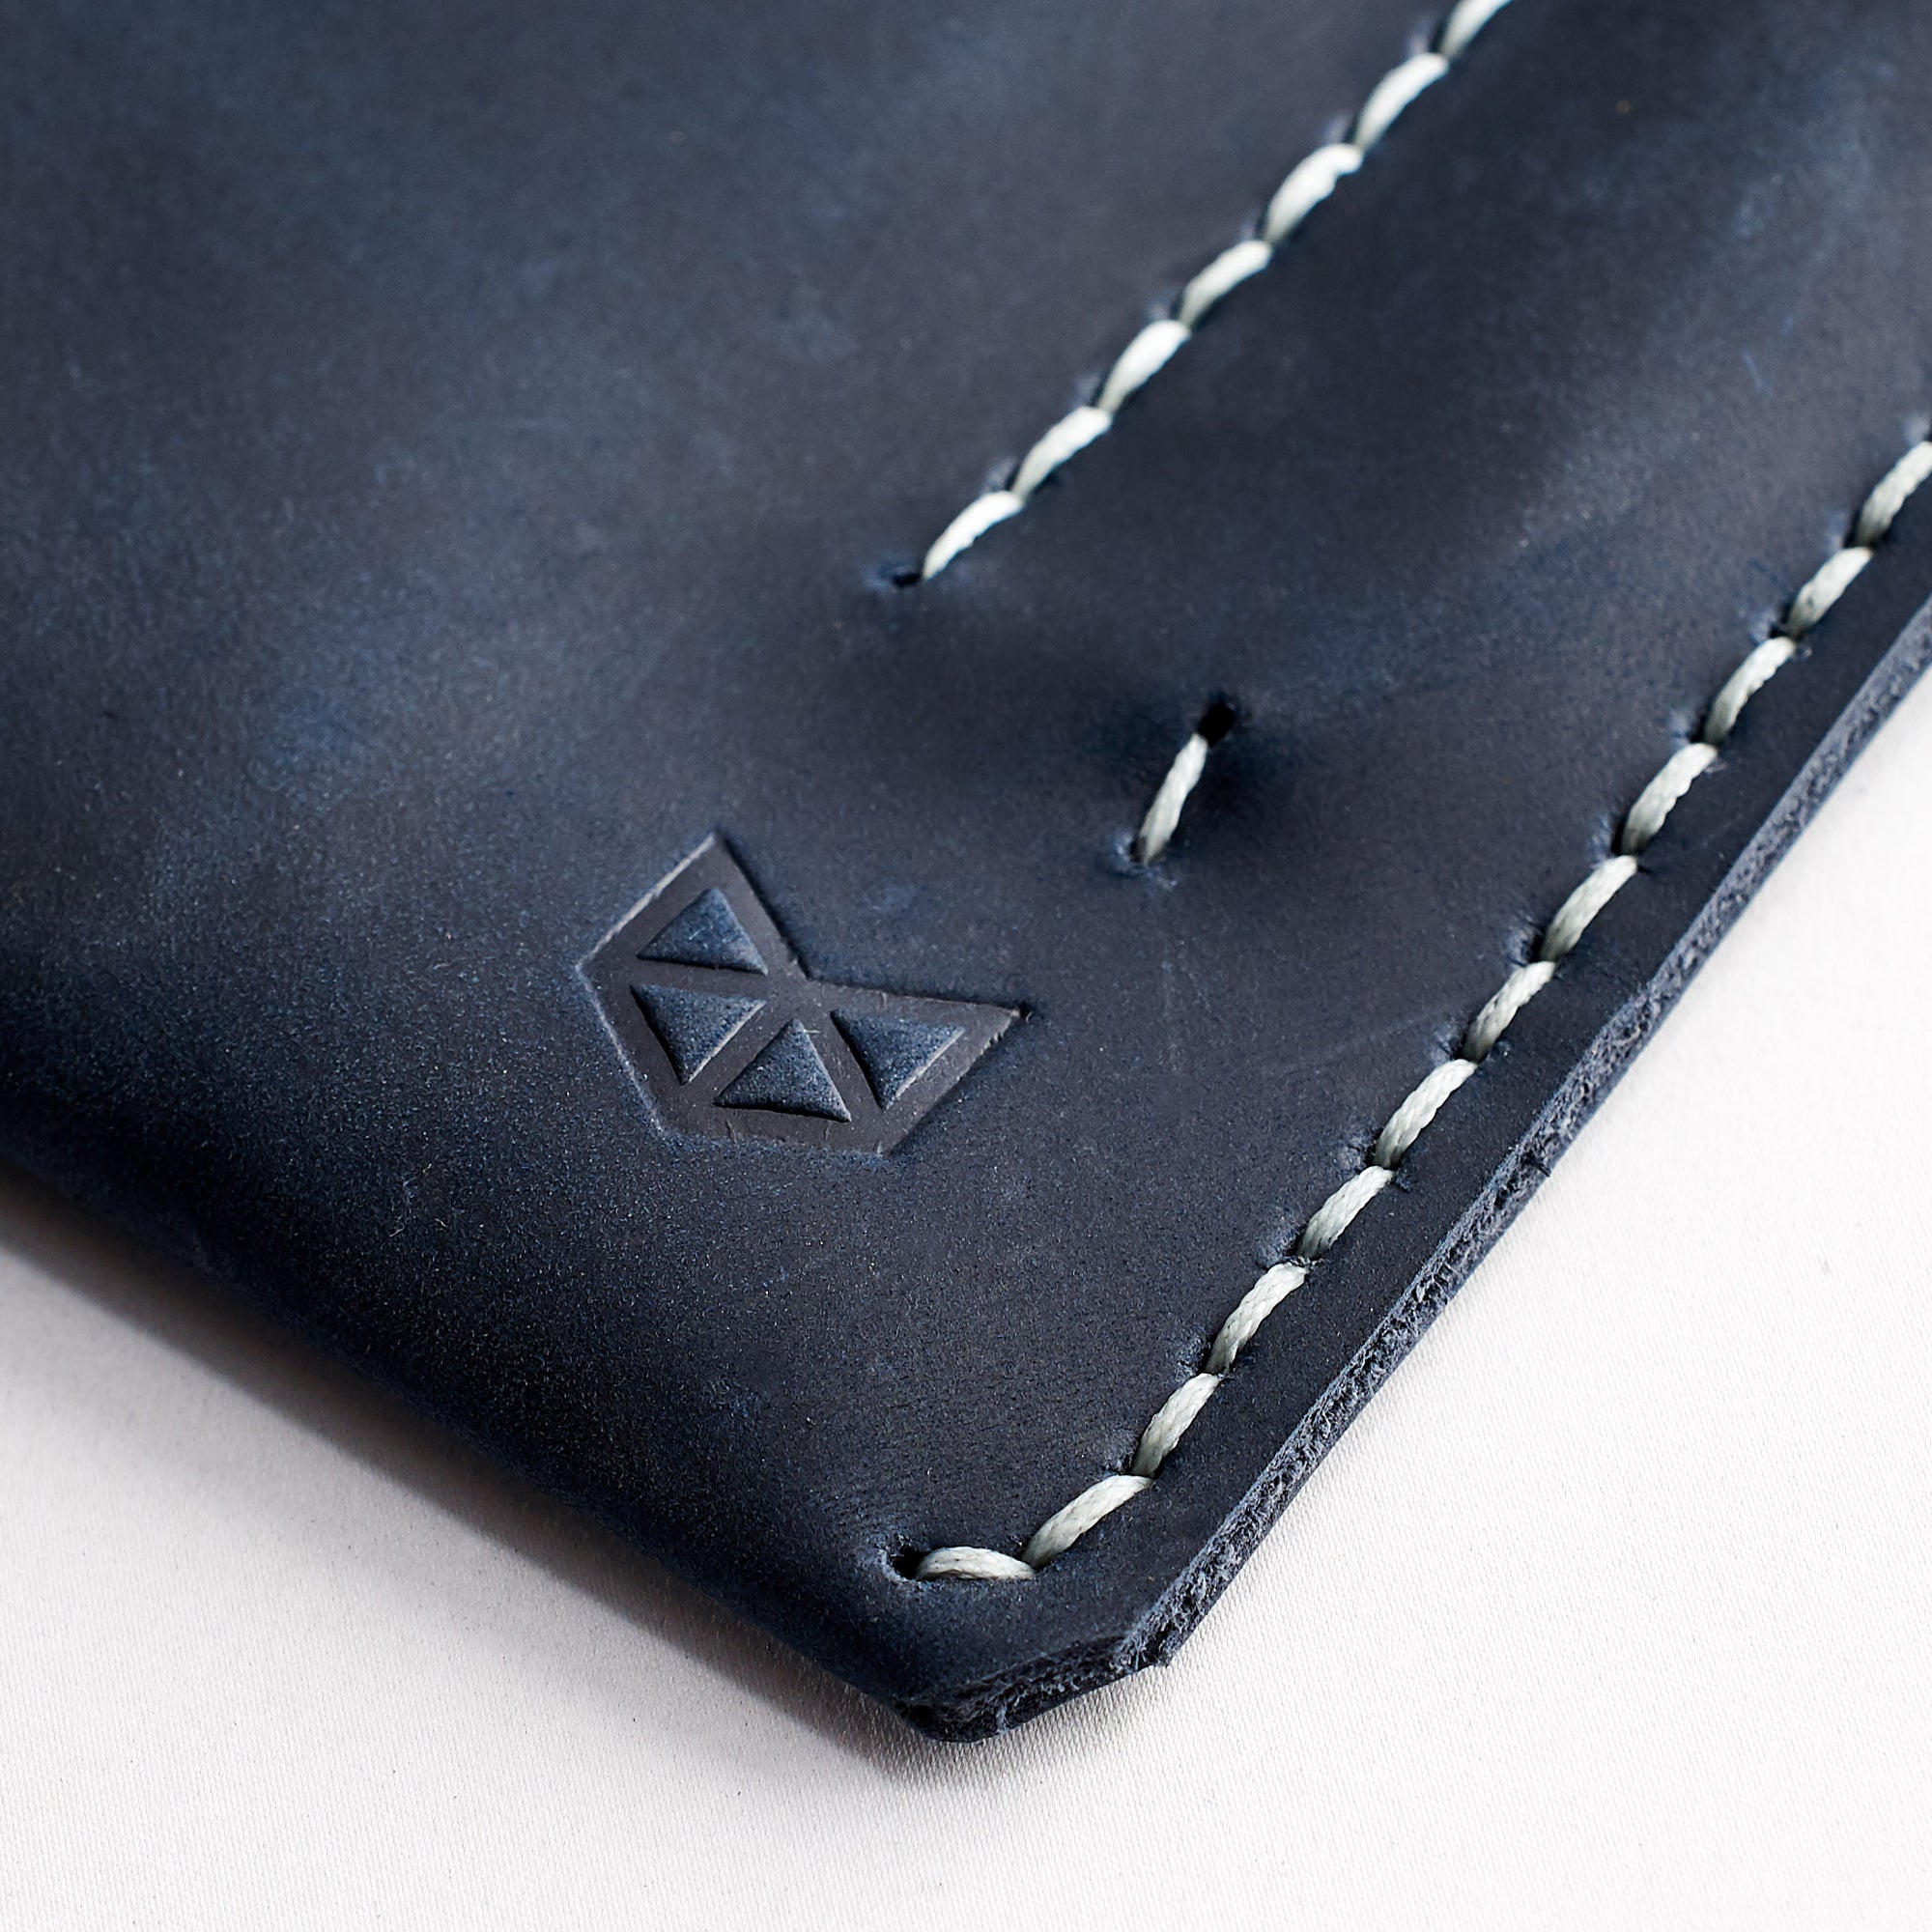 Hand stitch. Blue handcrafted leather reMarkable tablet case. Folio with Marker holder. Paper E-ink tablet minimalist sleeve design. 